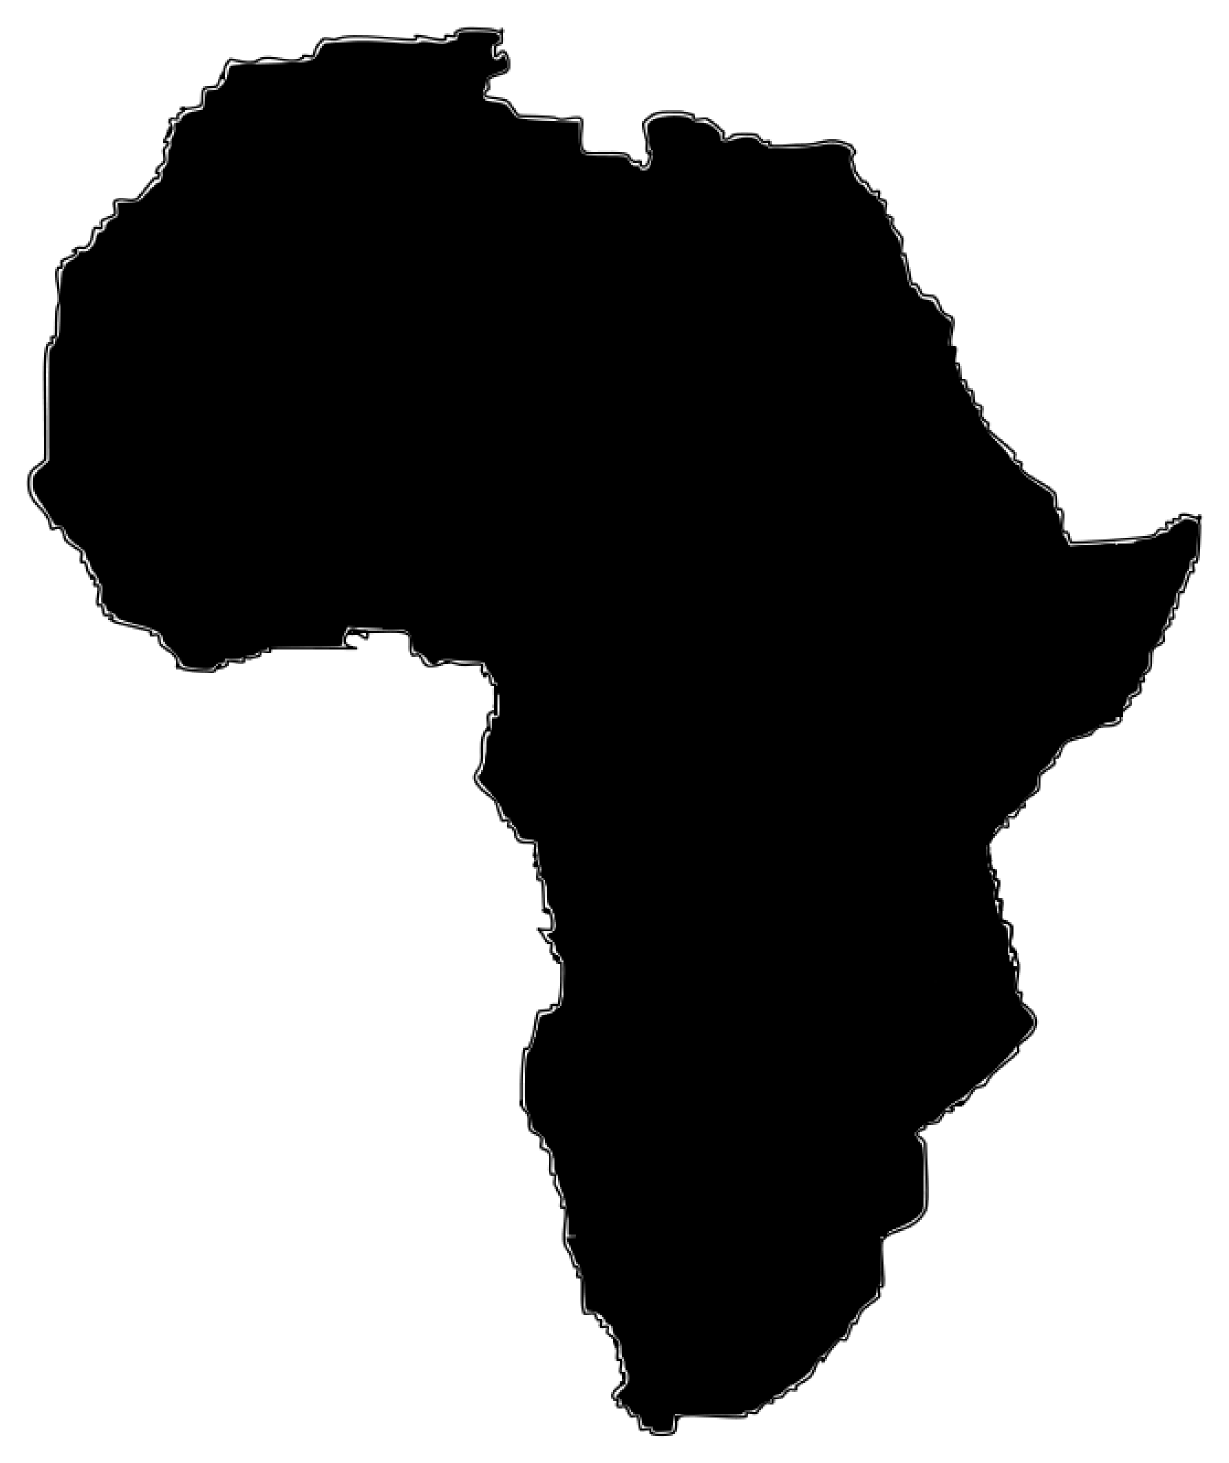 Africa clipart map